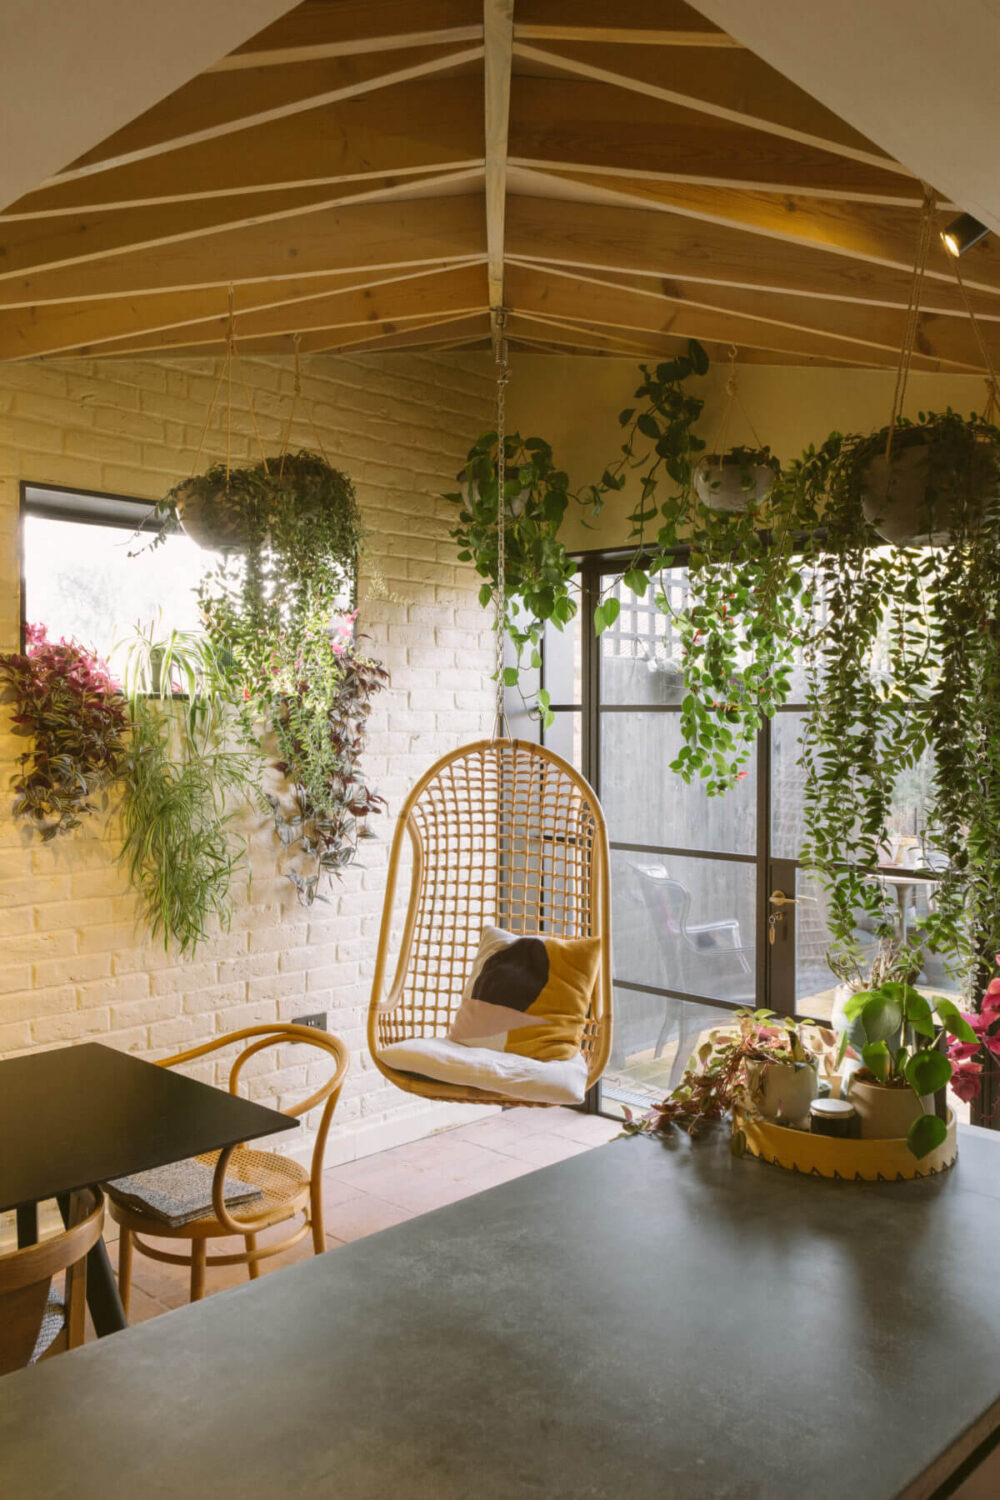 kitchen-exposed-beam-ceiling-rattan-hanging-chair-plants-nordroom